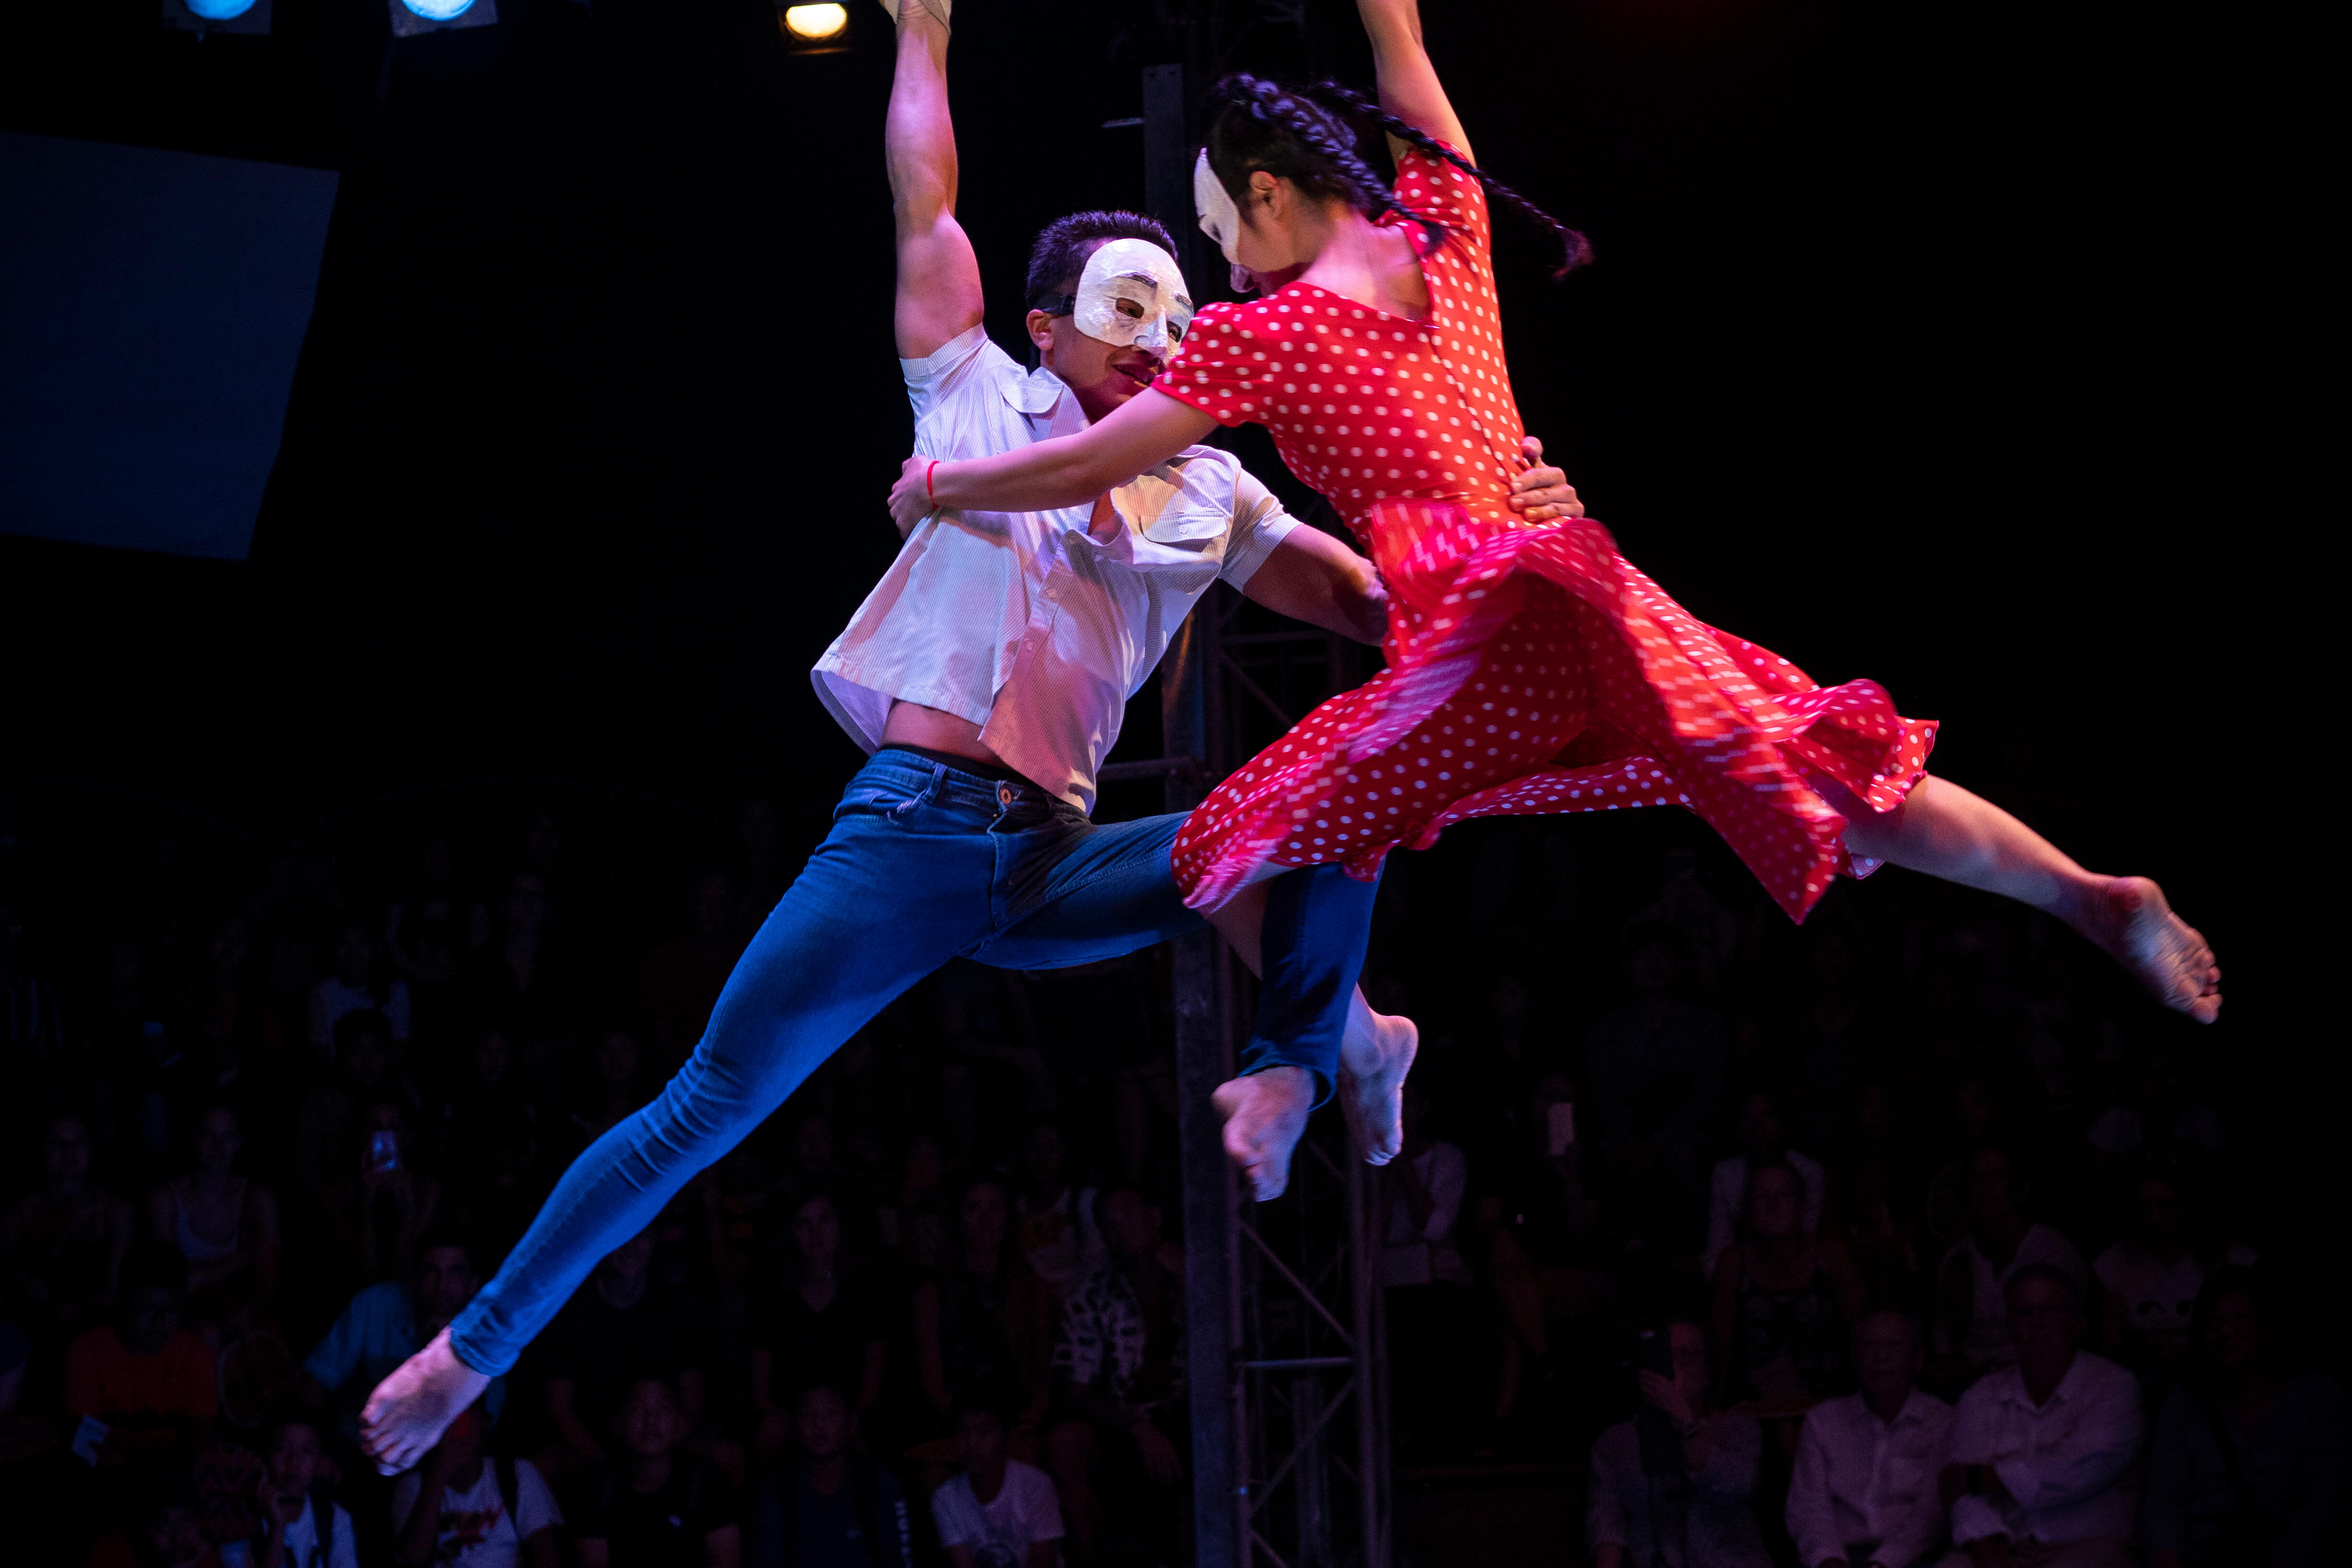 Two circus artists perform an aerial act suspended in mid air on fabric ropes. 